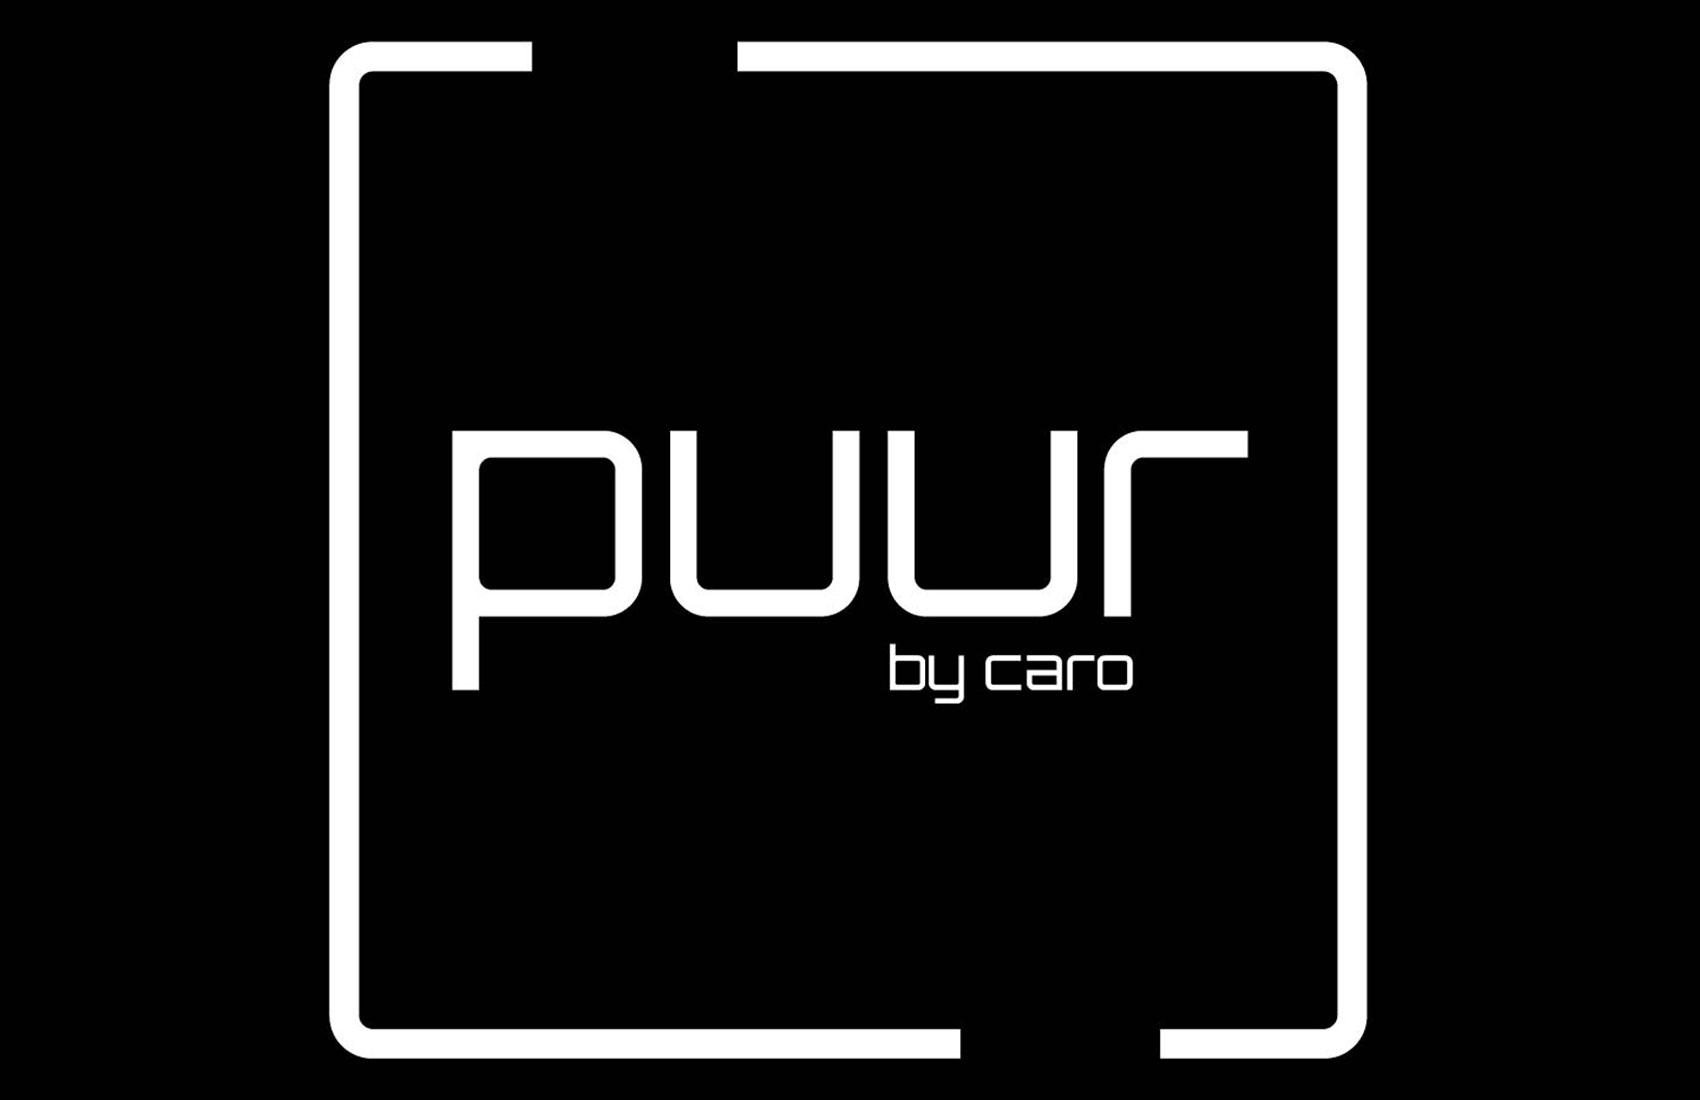 Puur by Caro